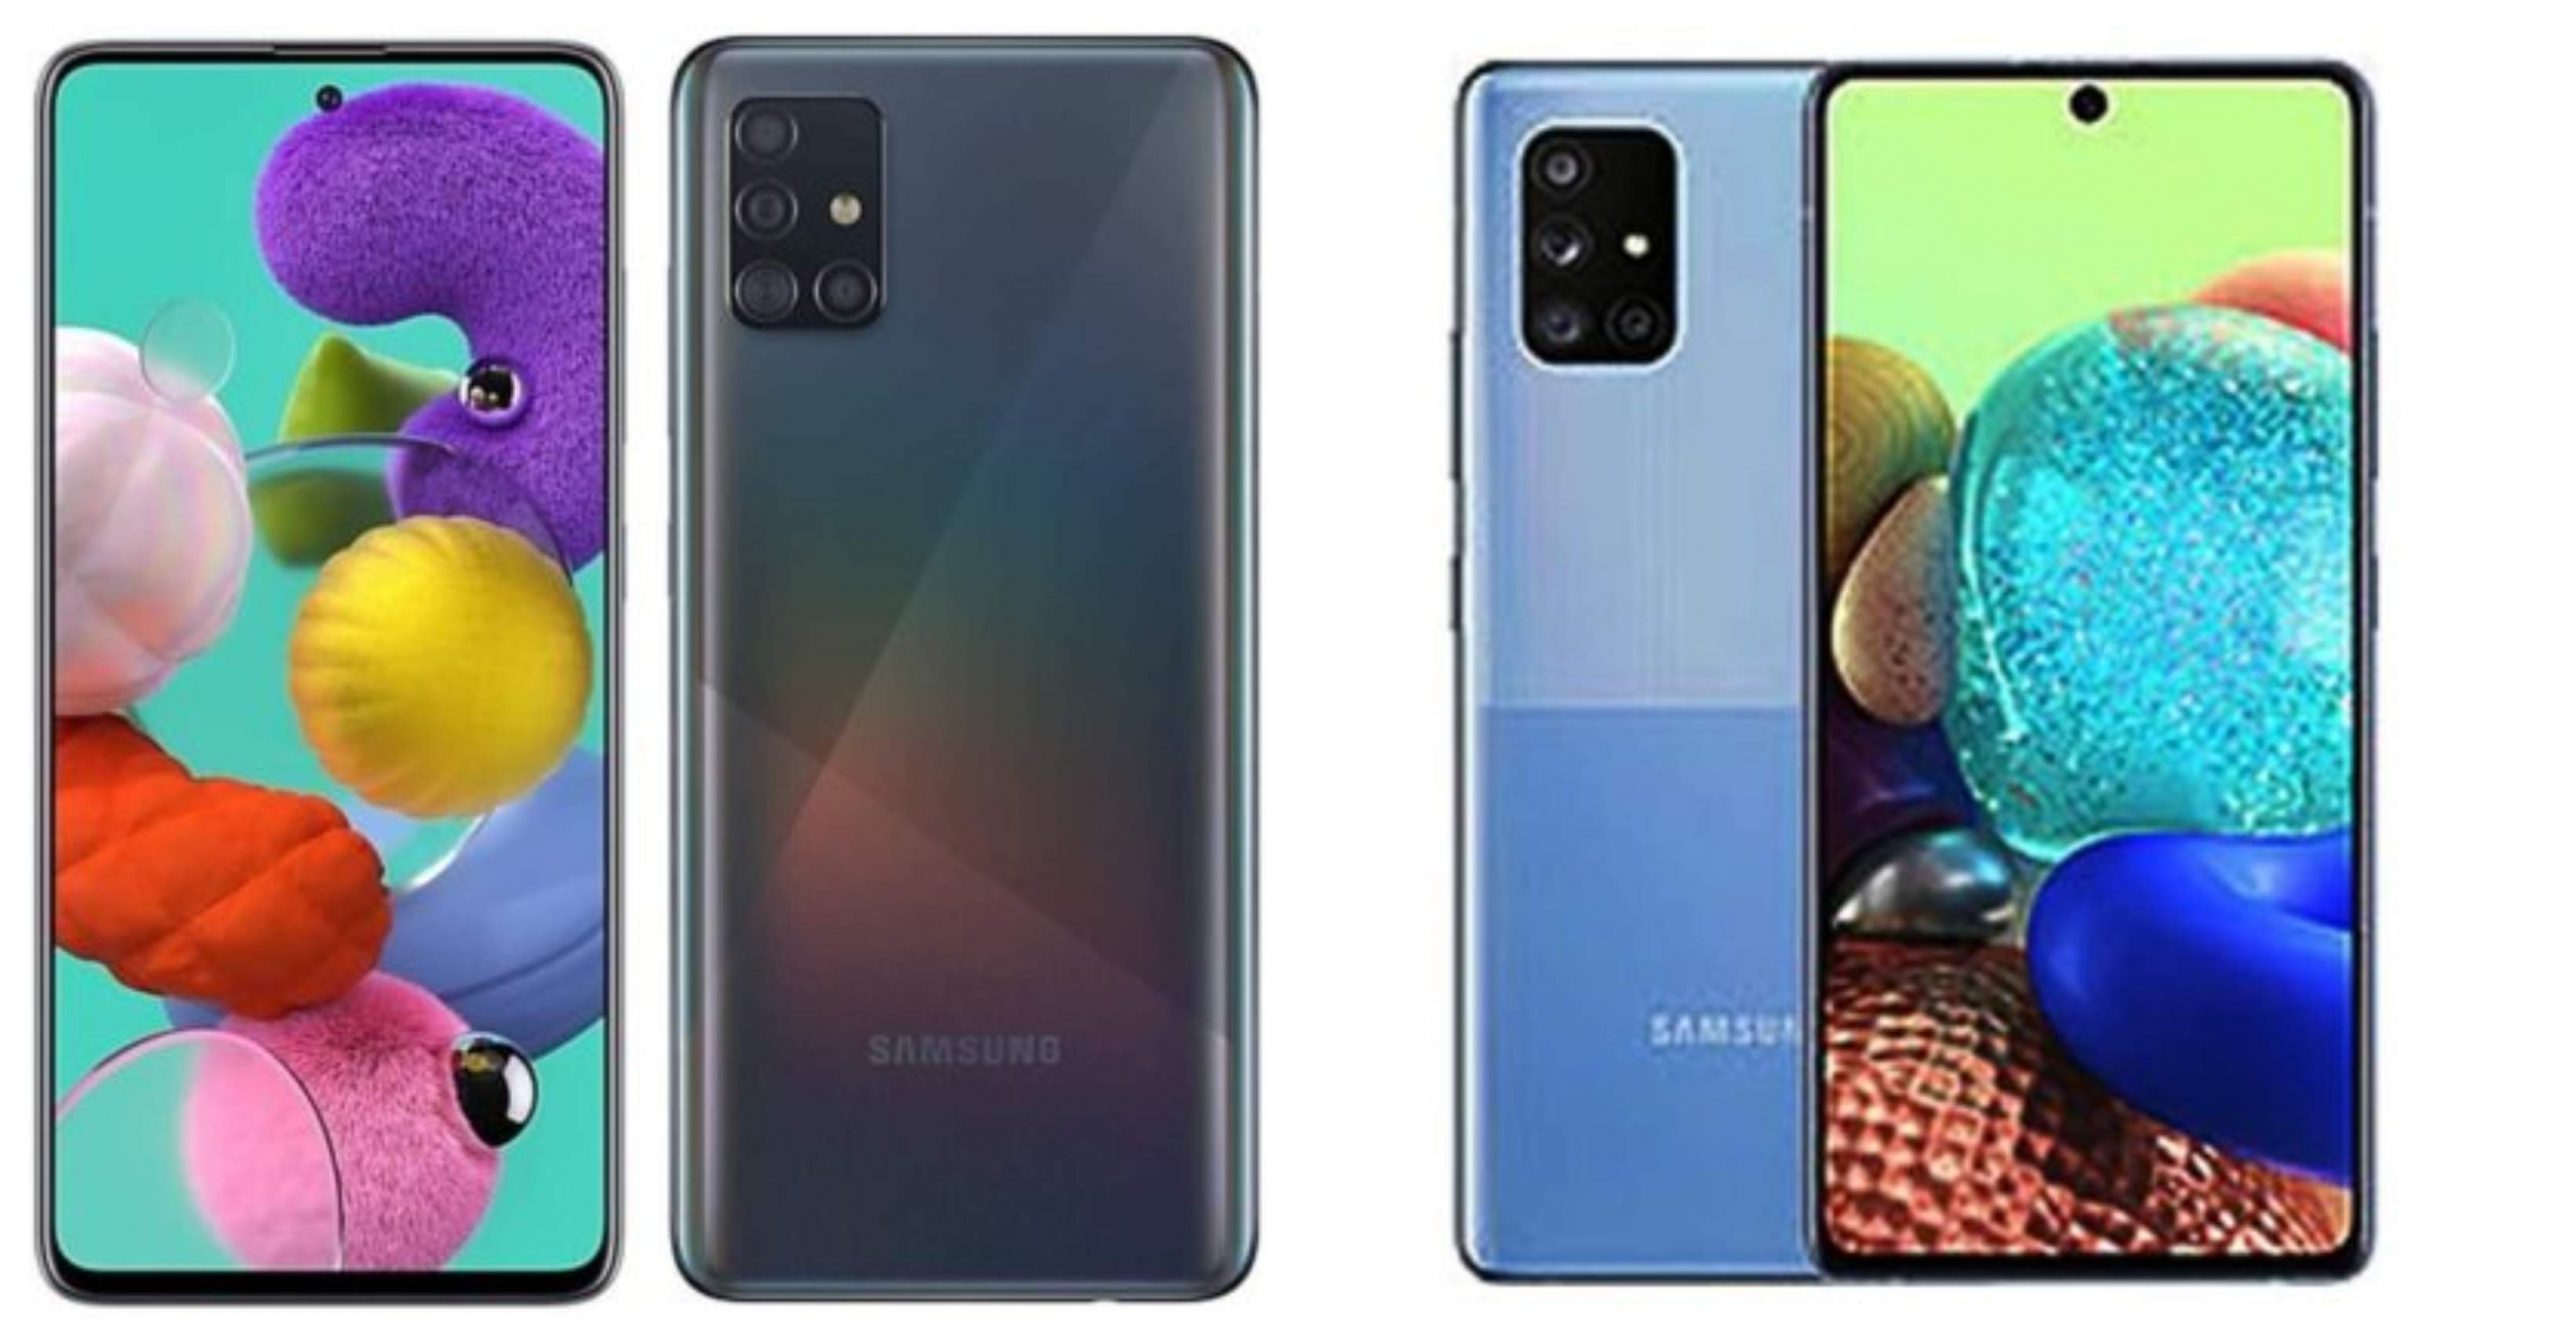 5G versions of Samsung Galaxy A51 and A71 get One UI 3.0(Android 11) update